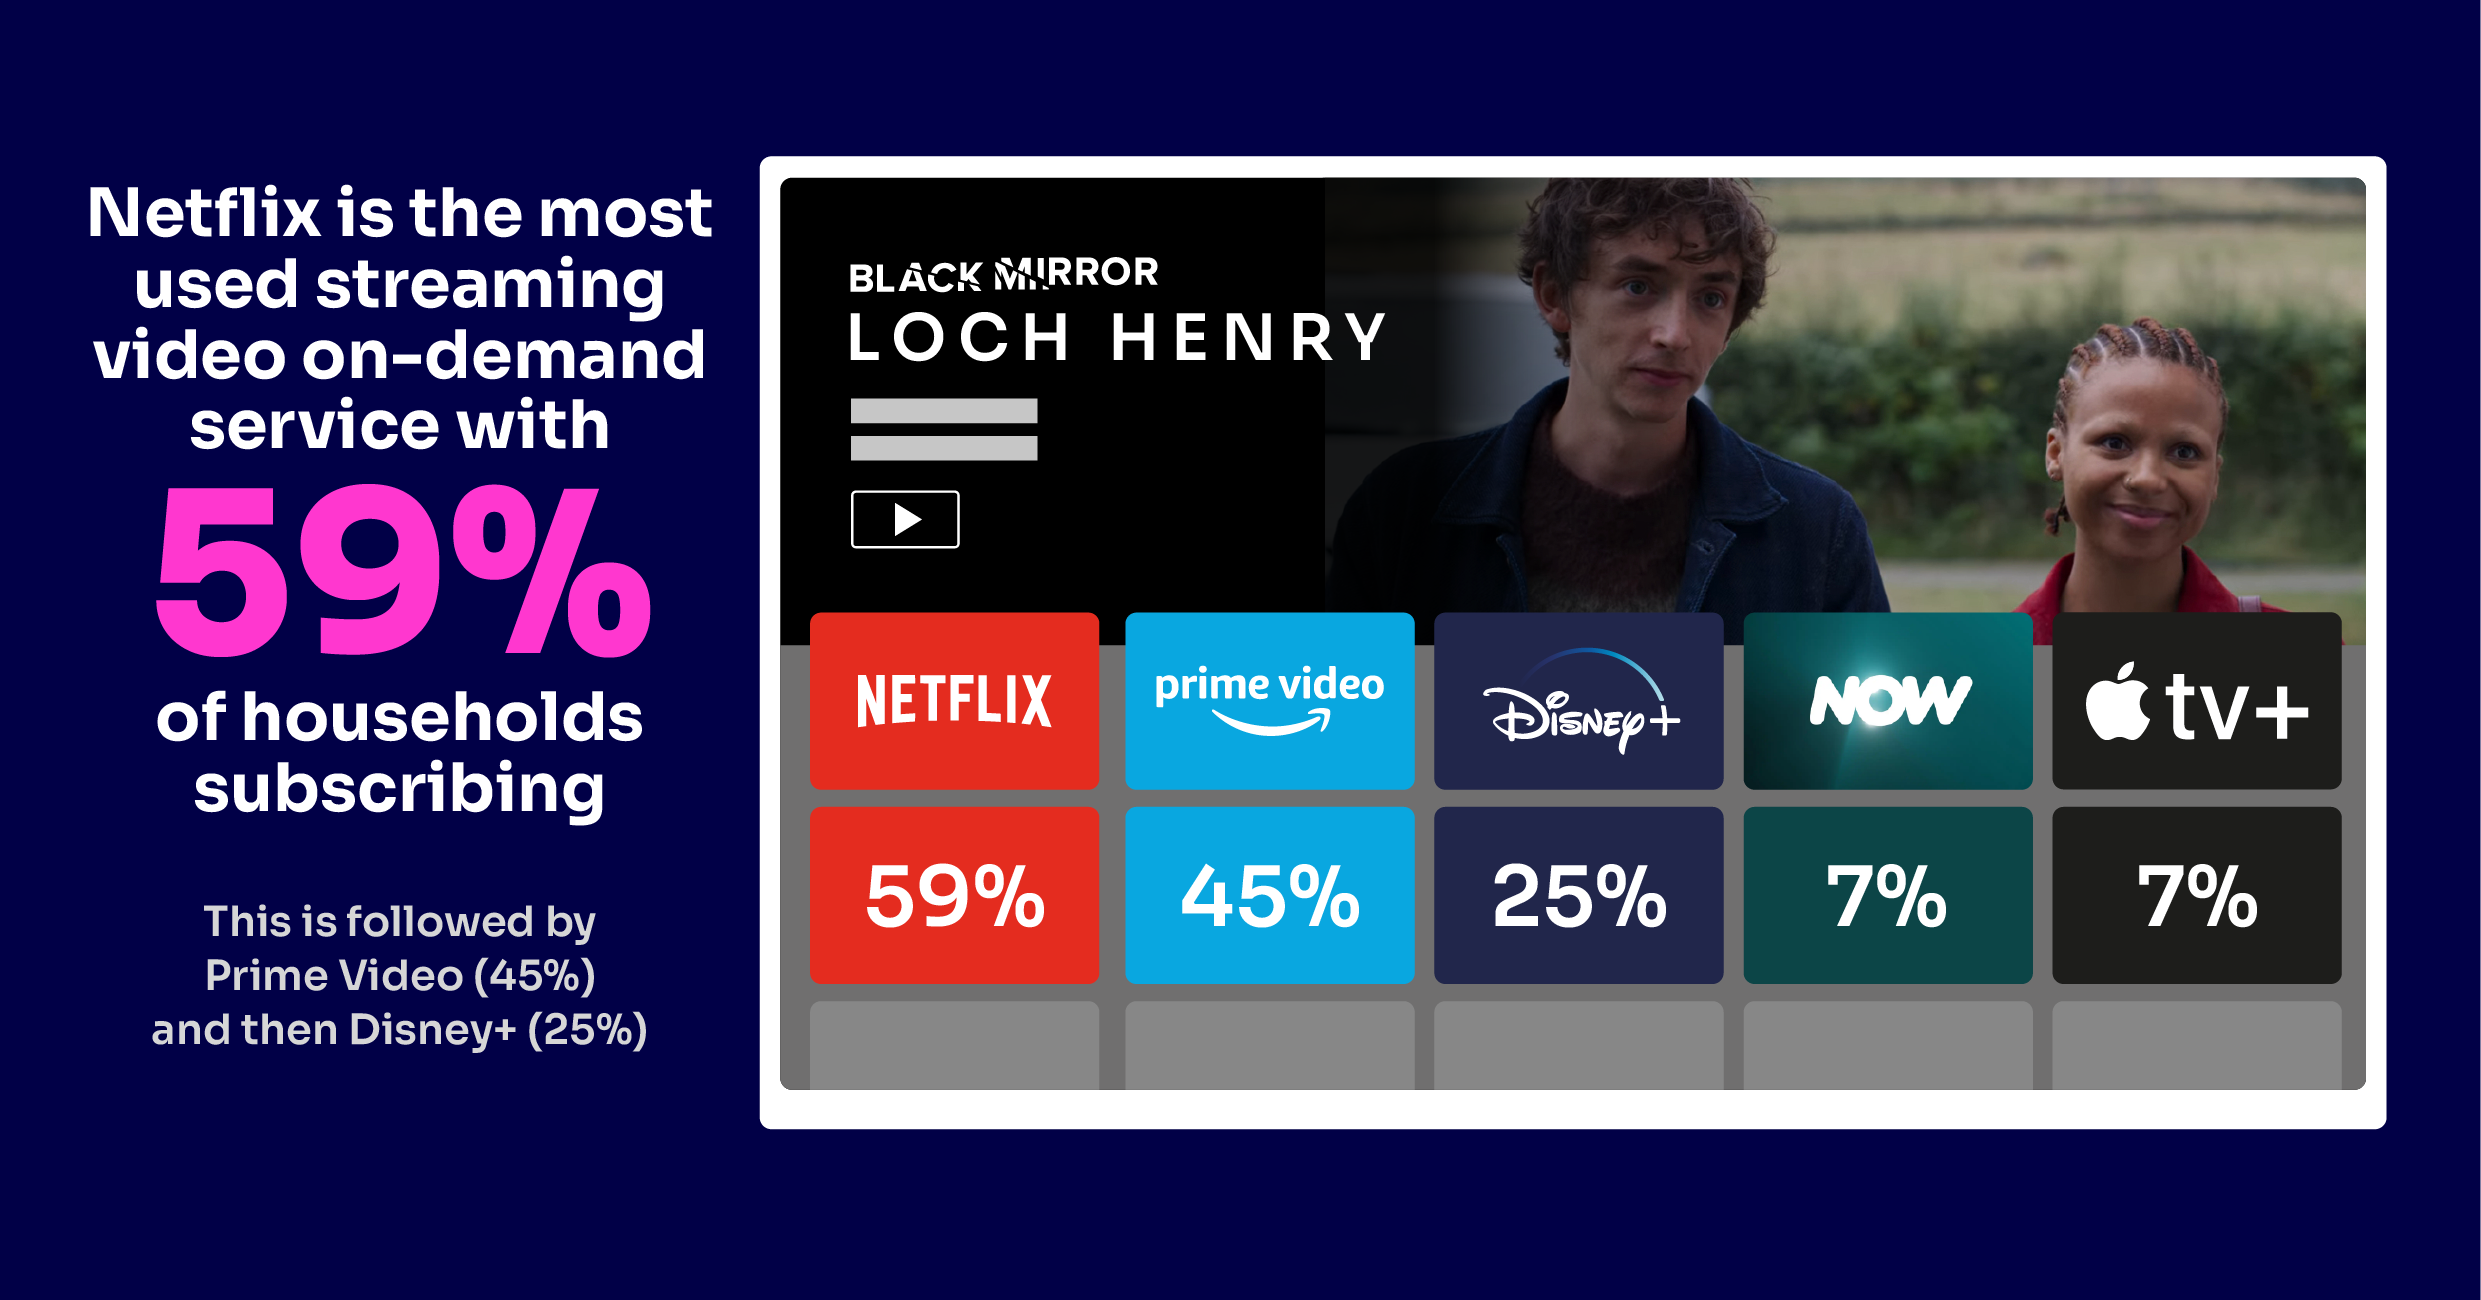 Netflix is the most used streaming video on-demand service with 59% subscribing households